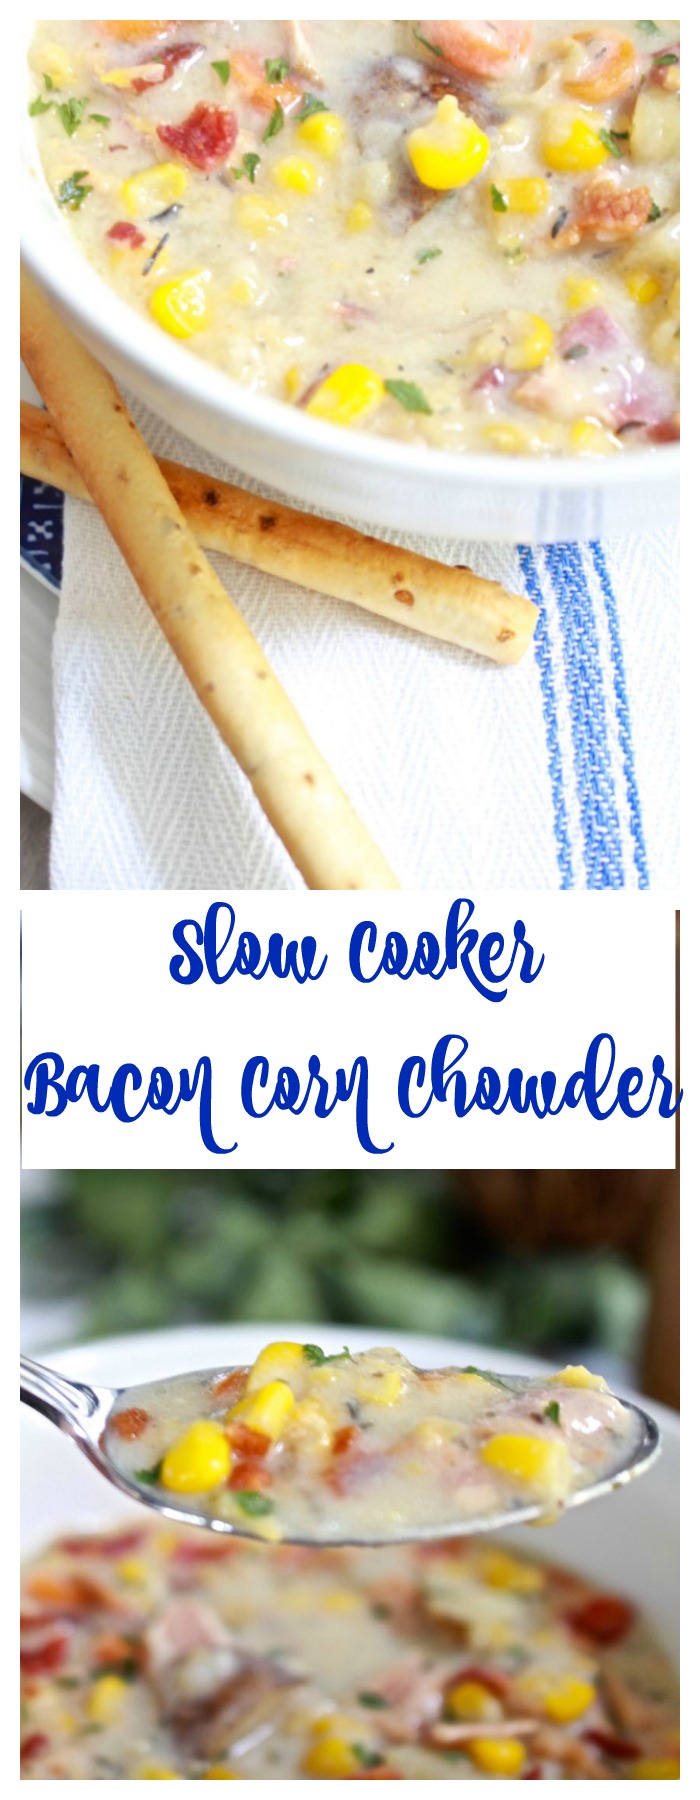 Slow Cooker Bacon Corn Chowder